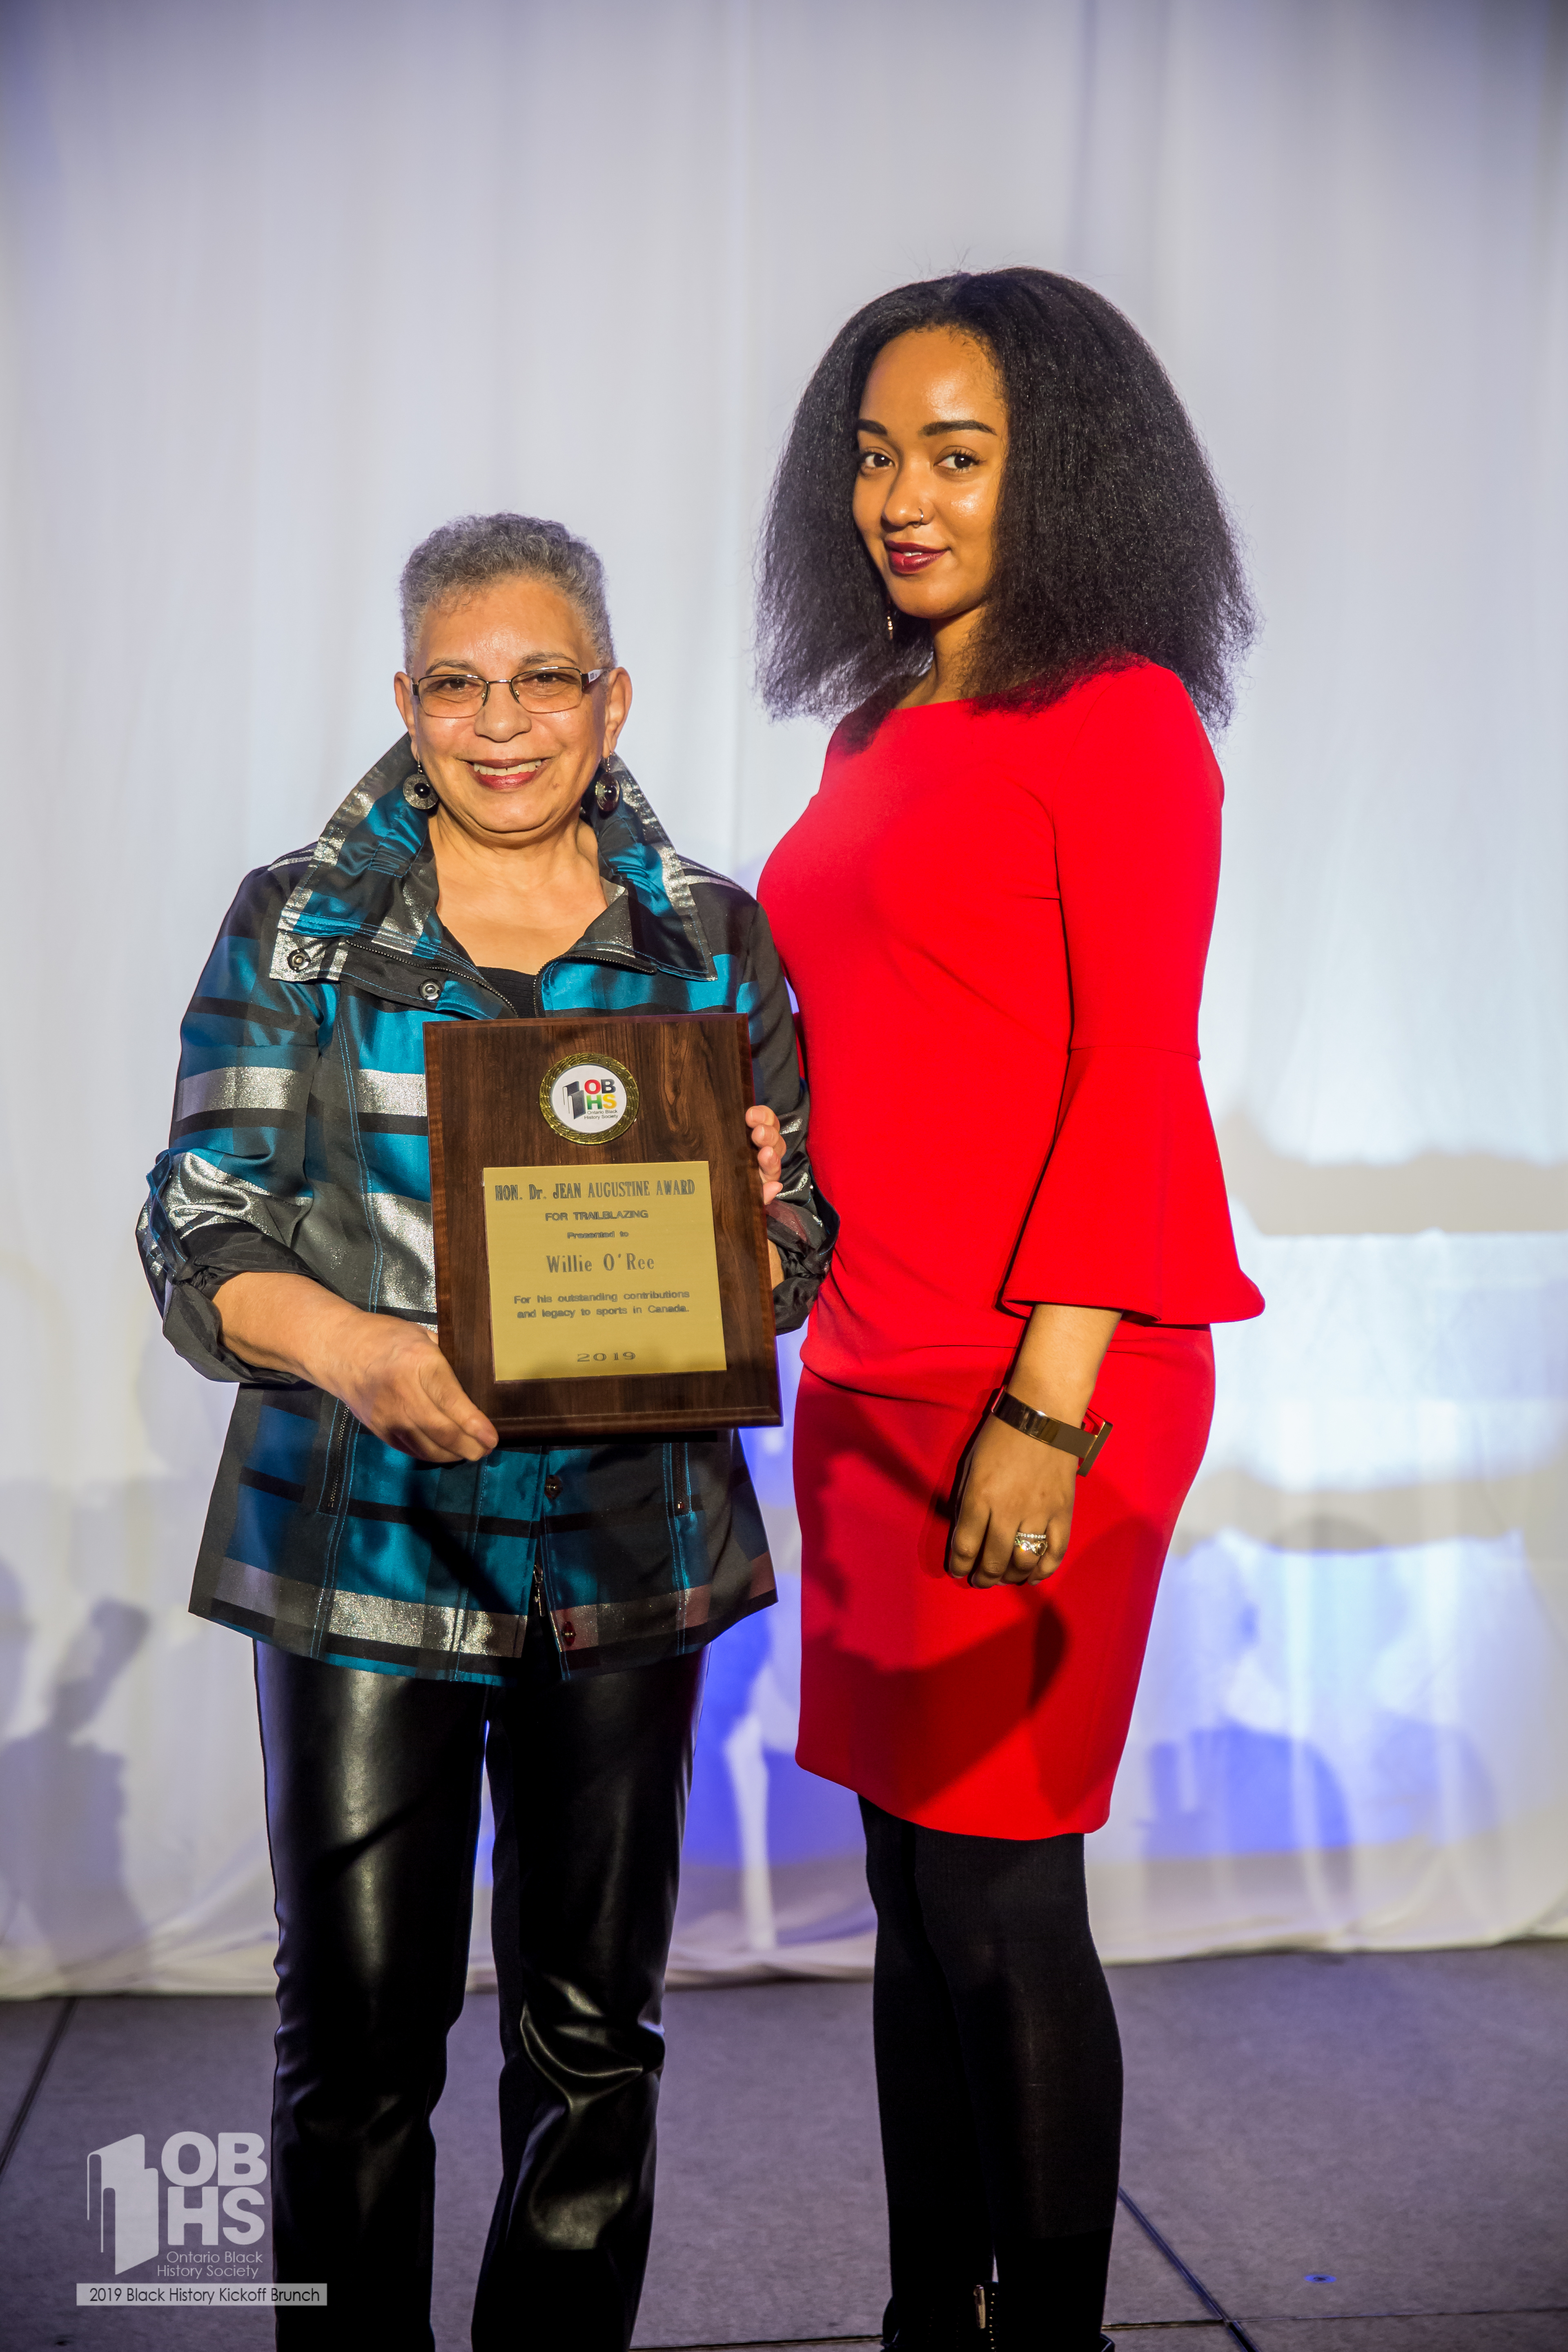 Our host Amanda Parris stands with Bernice Carnegie- receiving an award on behalf of Willie O'Ree.  - photo by www.sayhilondon.com